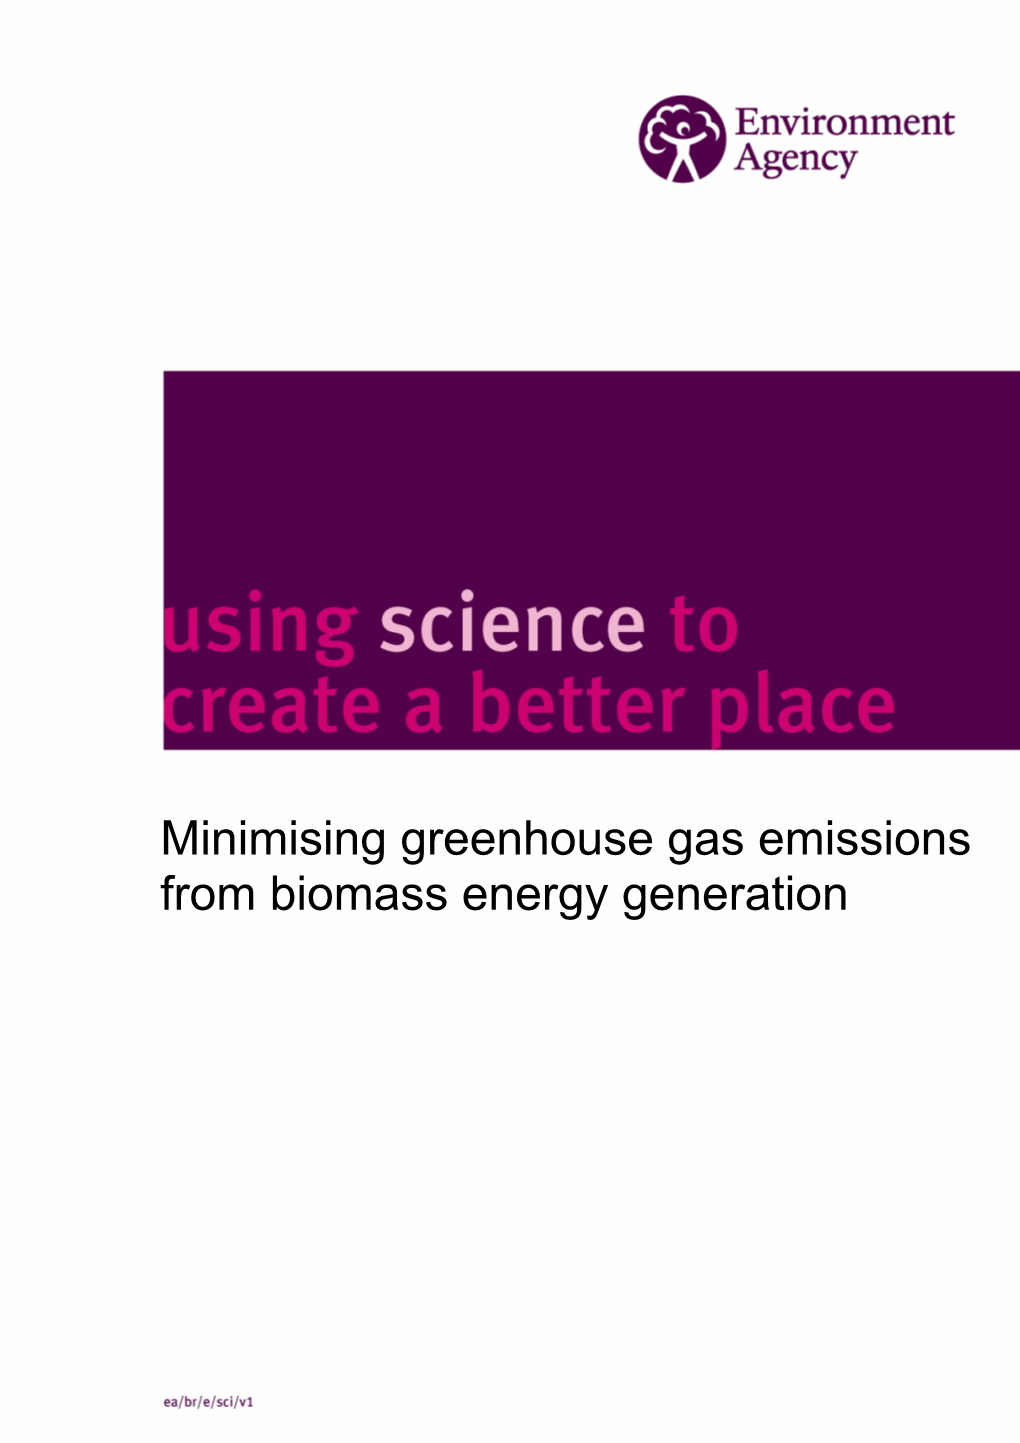 Minimising Greenhouse Gas Emissions from Biomass Energy Generation